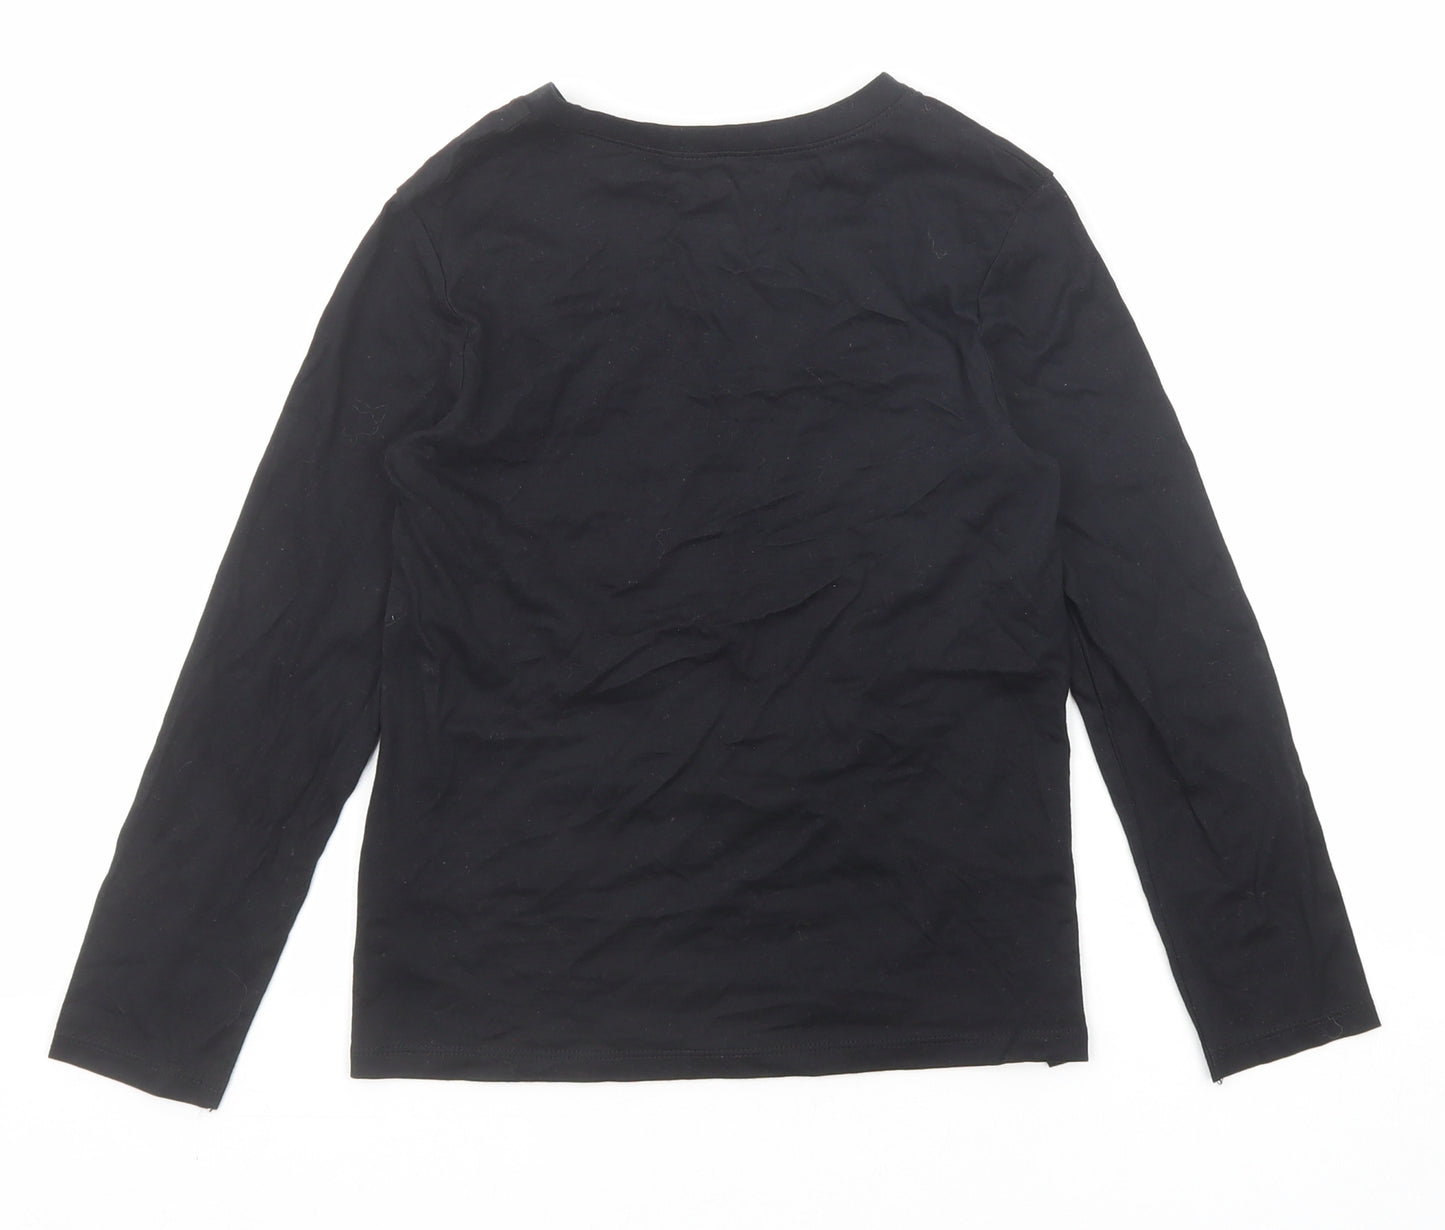 H&M Boys Black Cotton Basic T-Shirt Size 6-7 Years Round Neck Pullover - Skeleton Size 6-8 Years